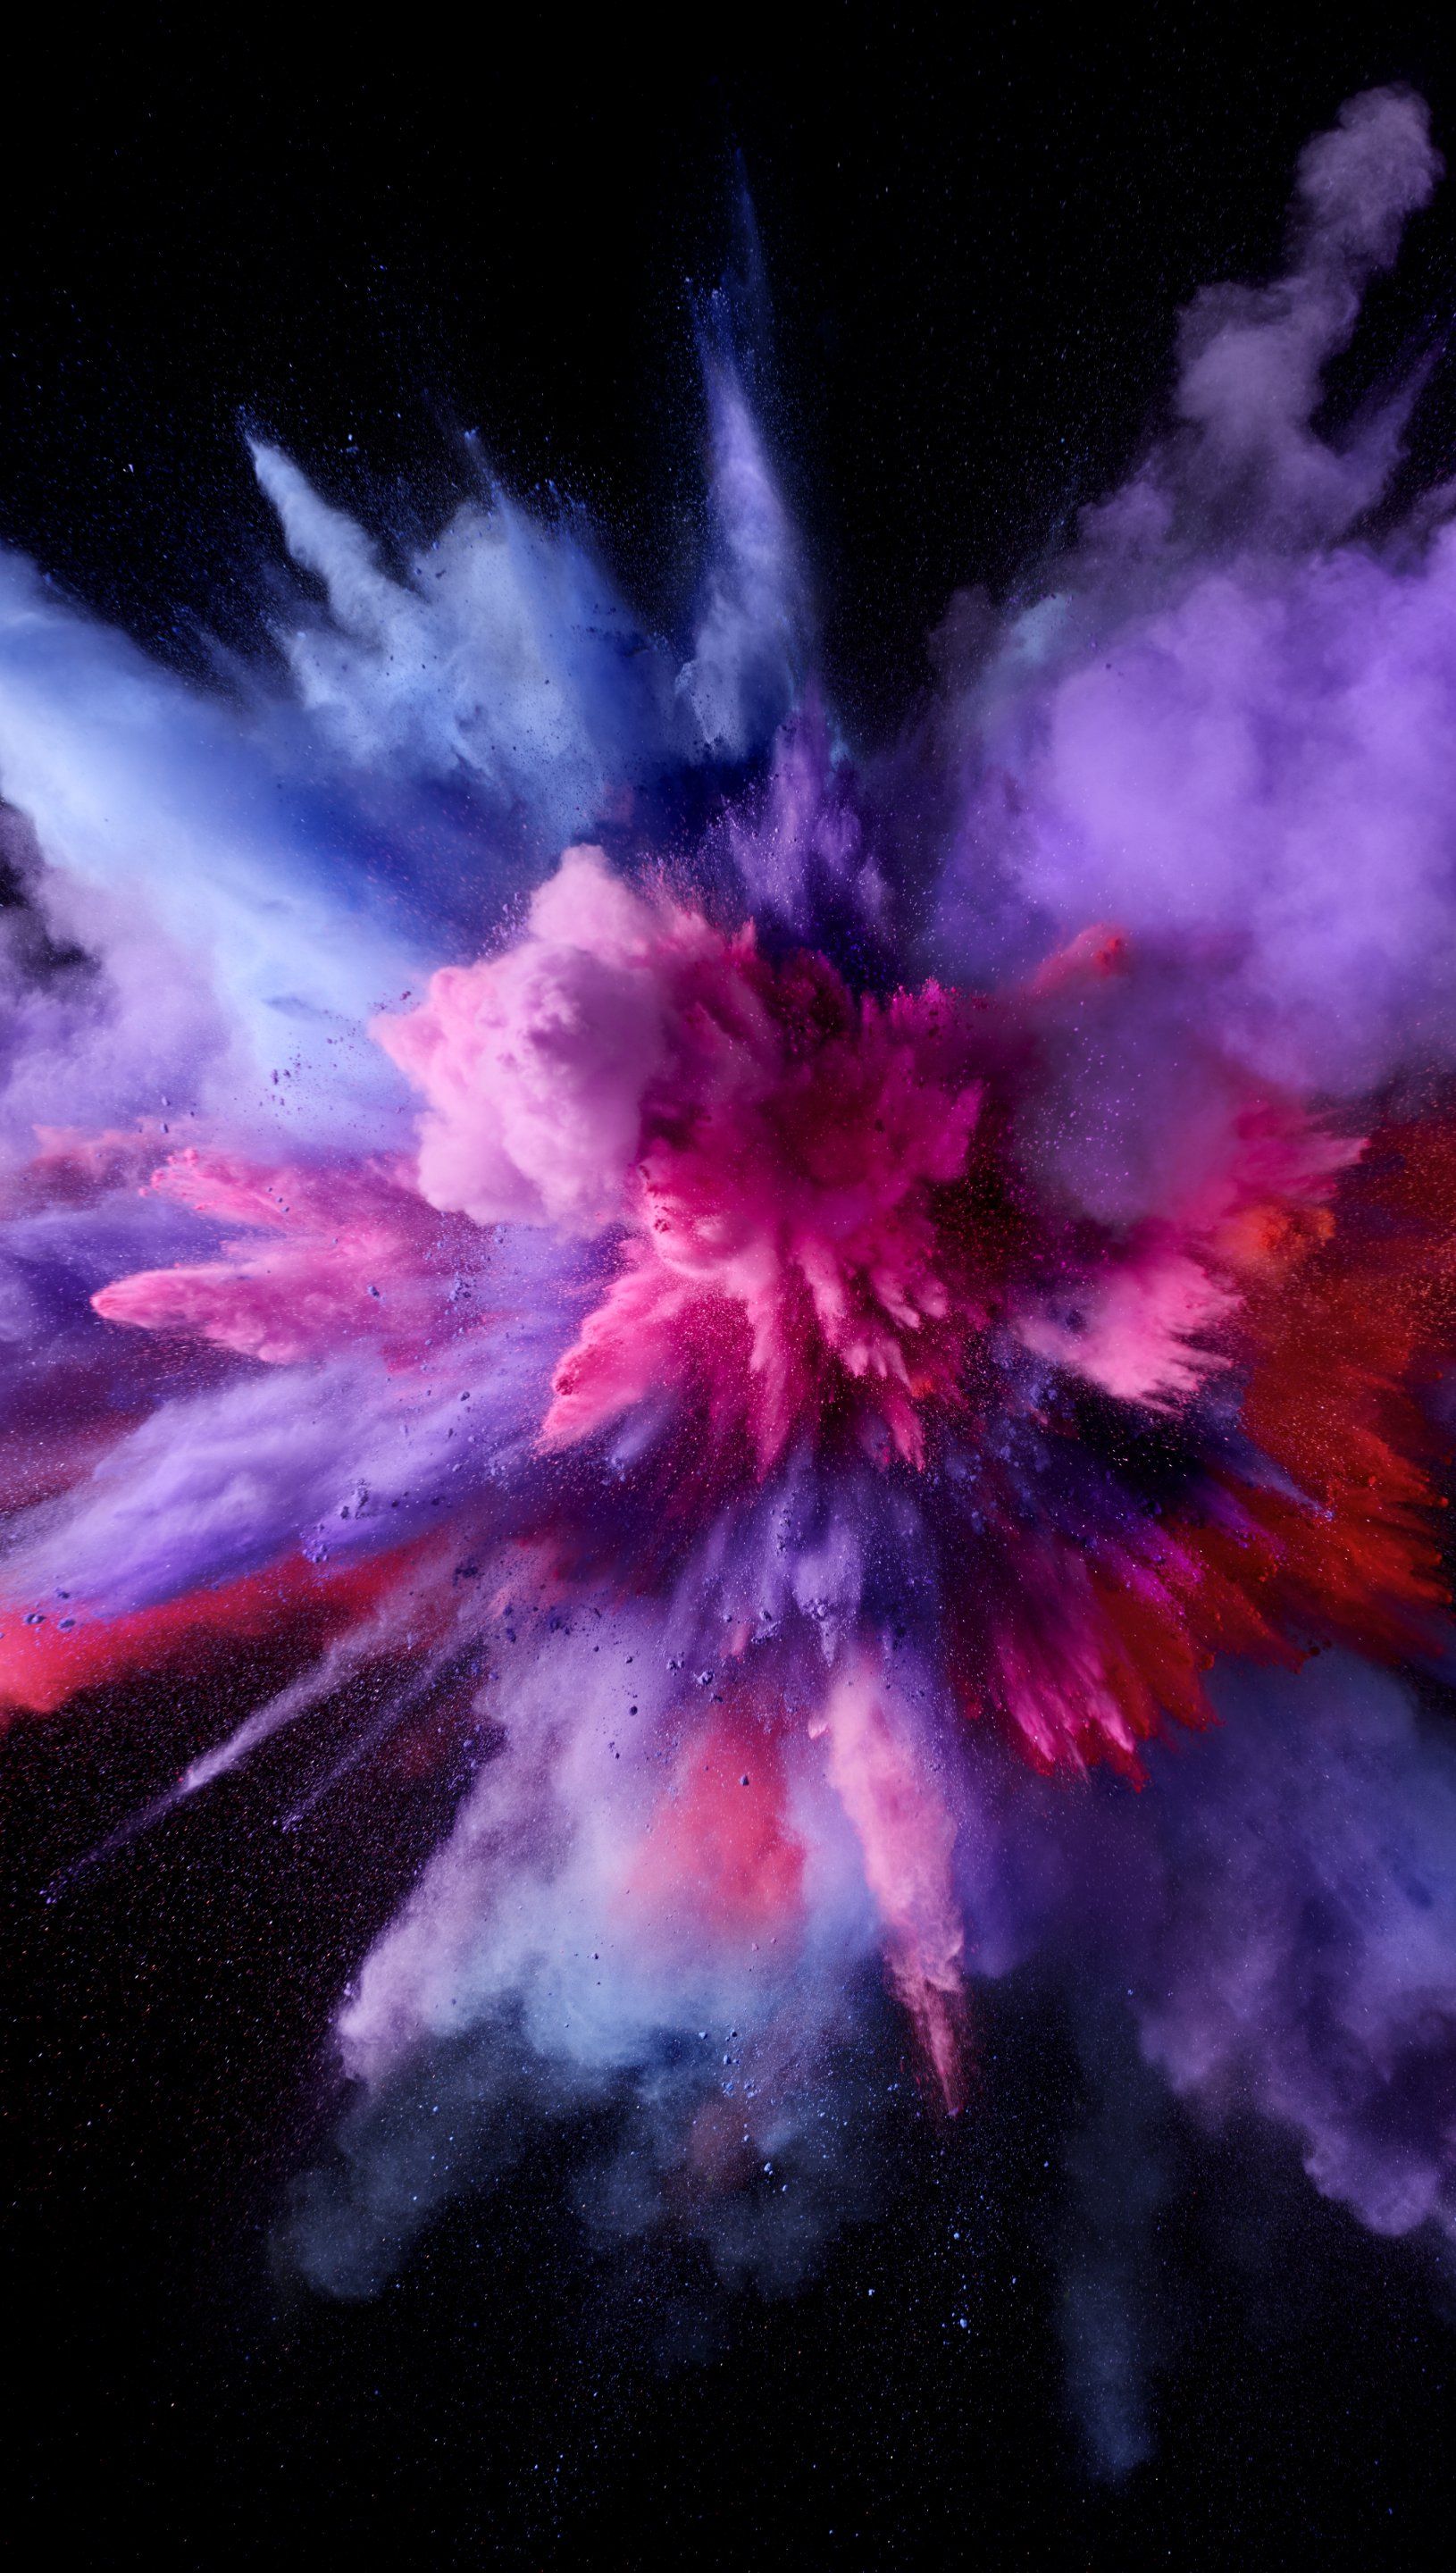 Explosion colored dust and smoke Wallpaper 5k Ultra HD